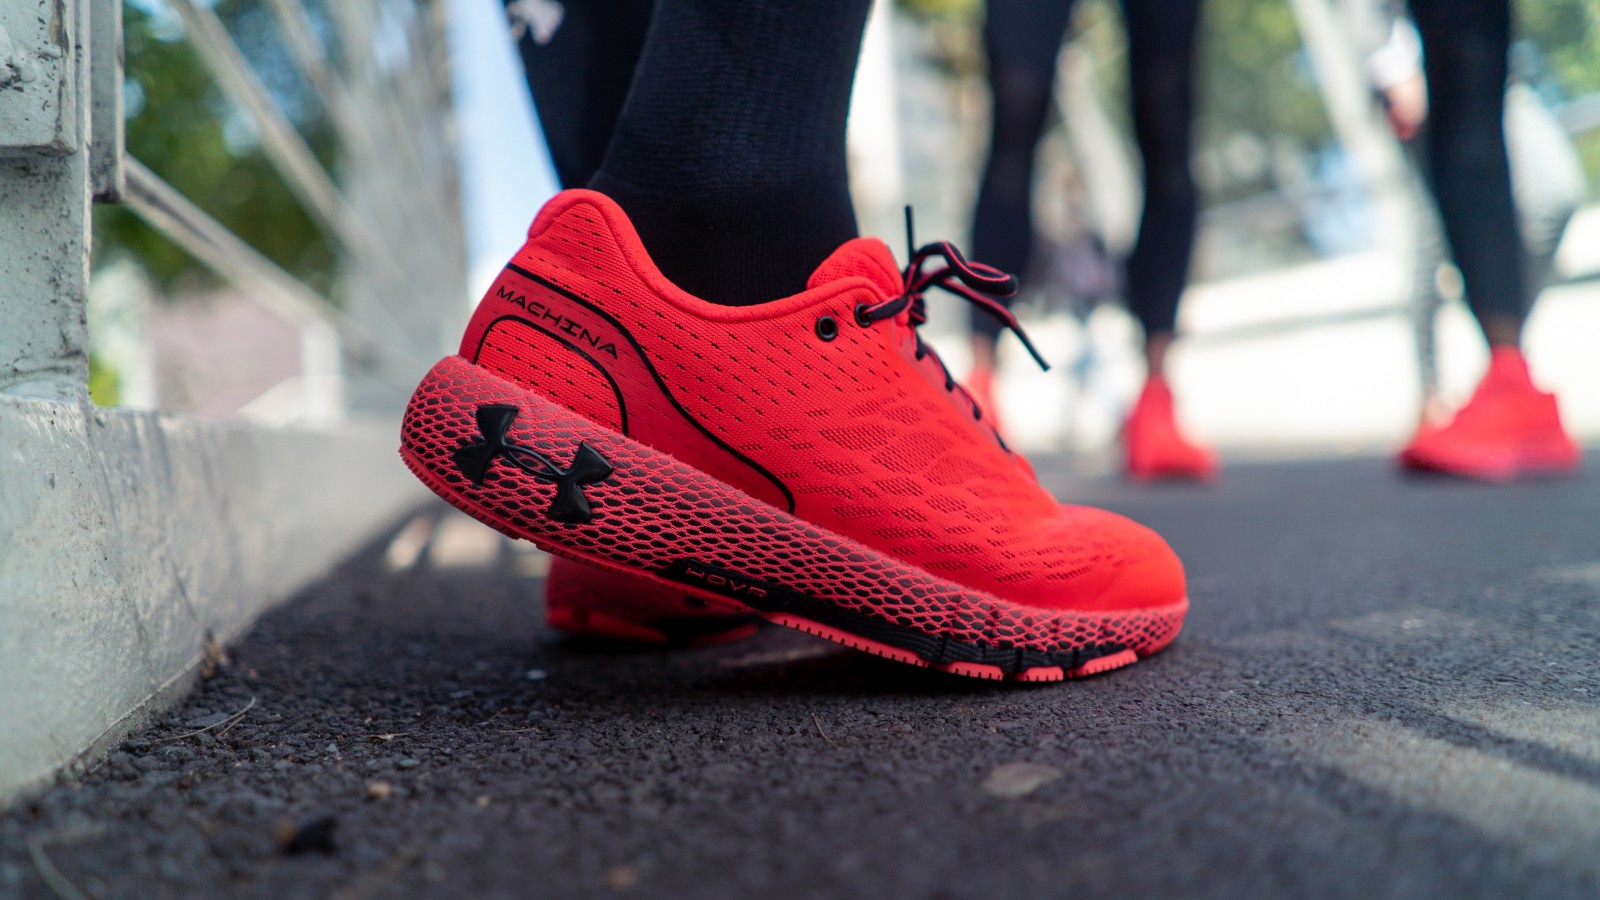 Under Armour debuts its new connected running shoe in South Africa